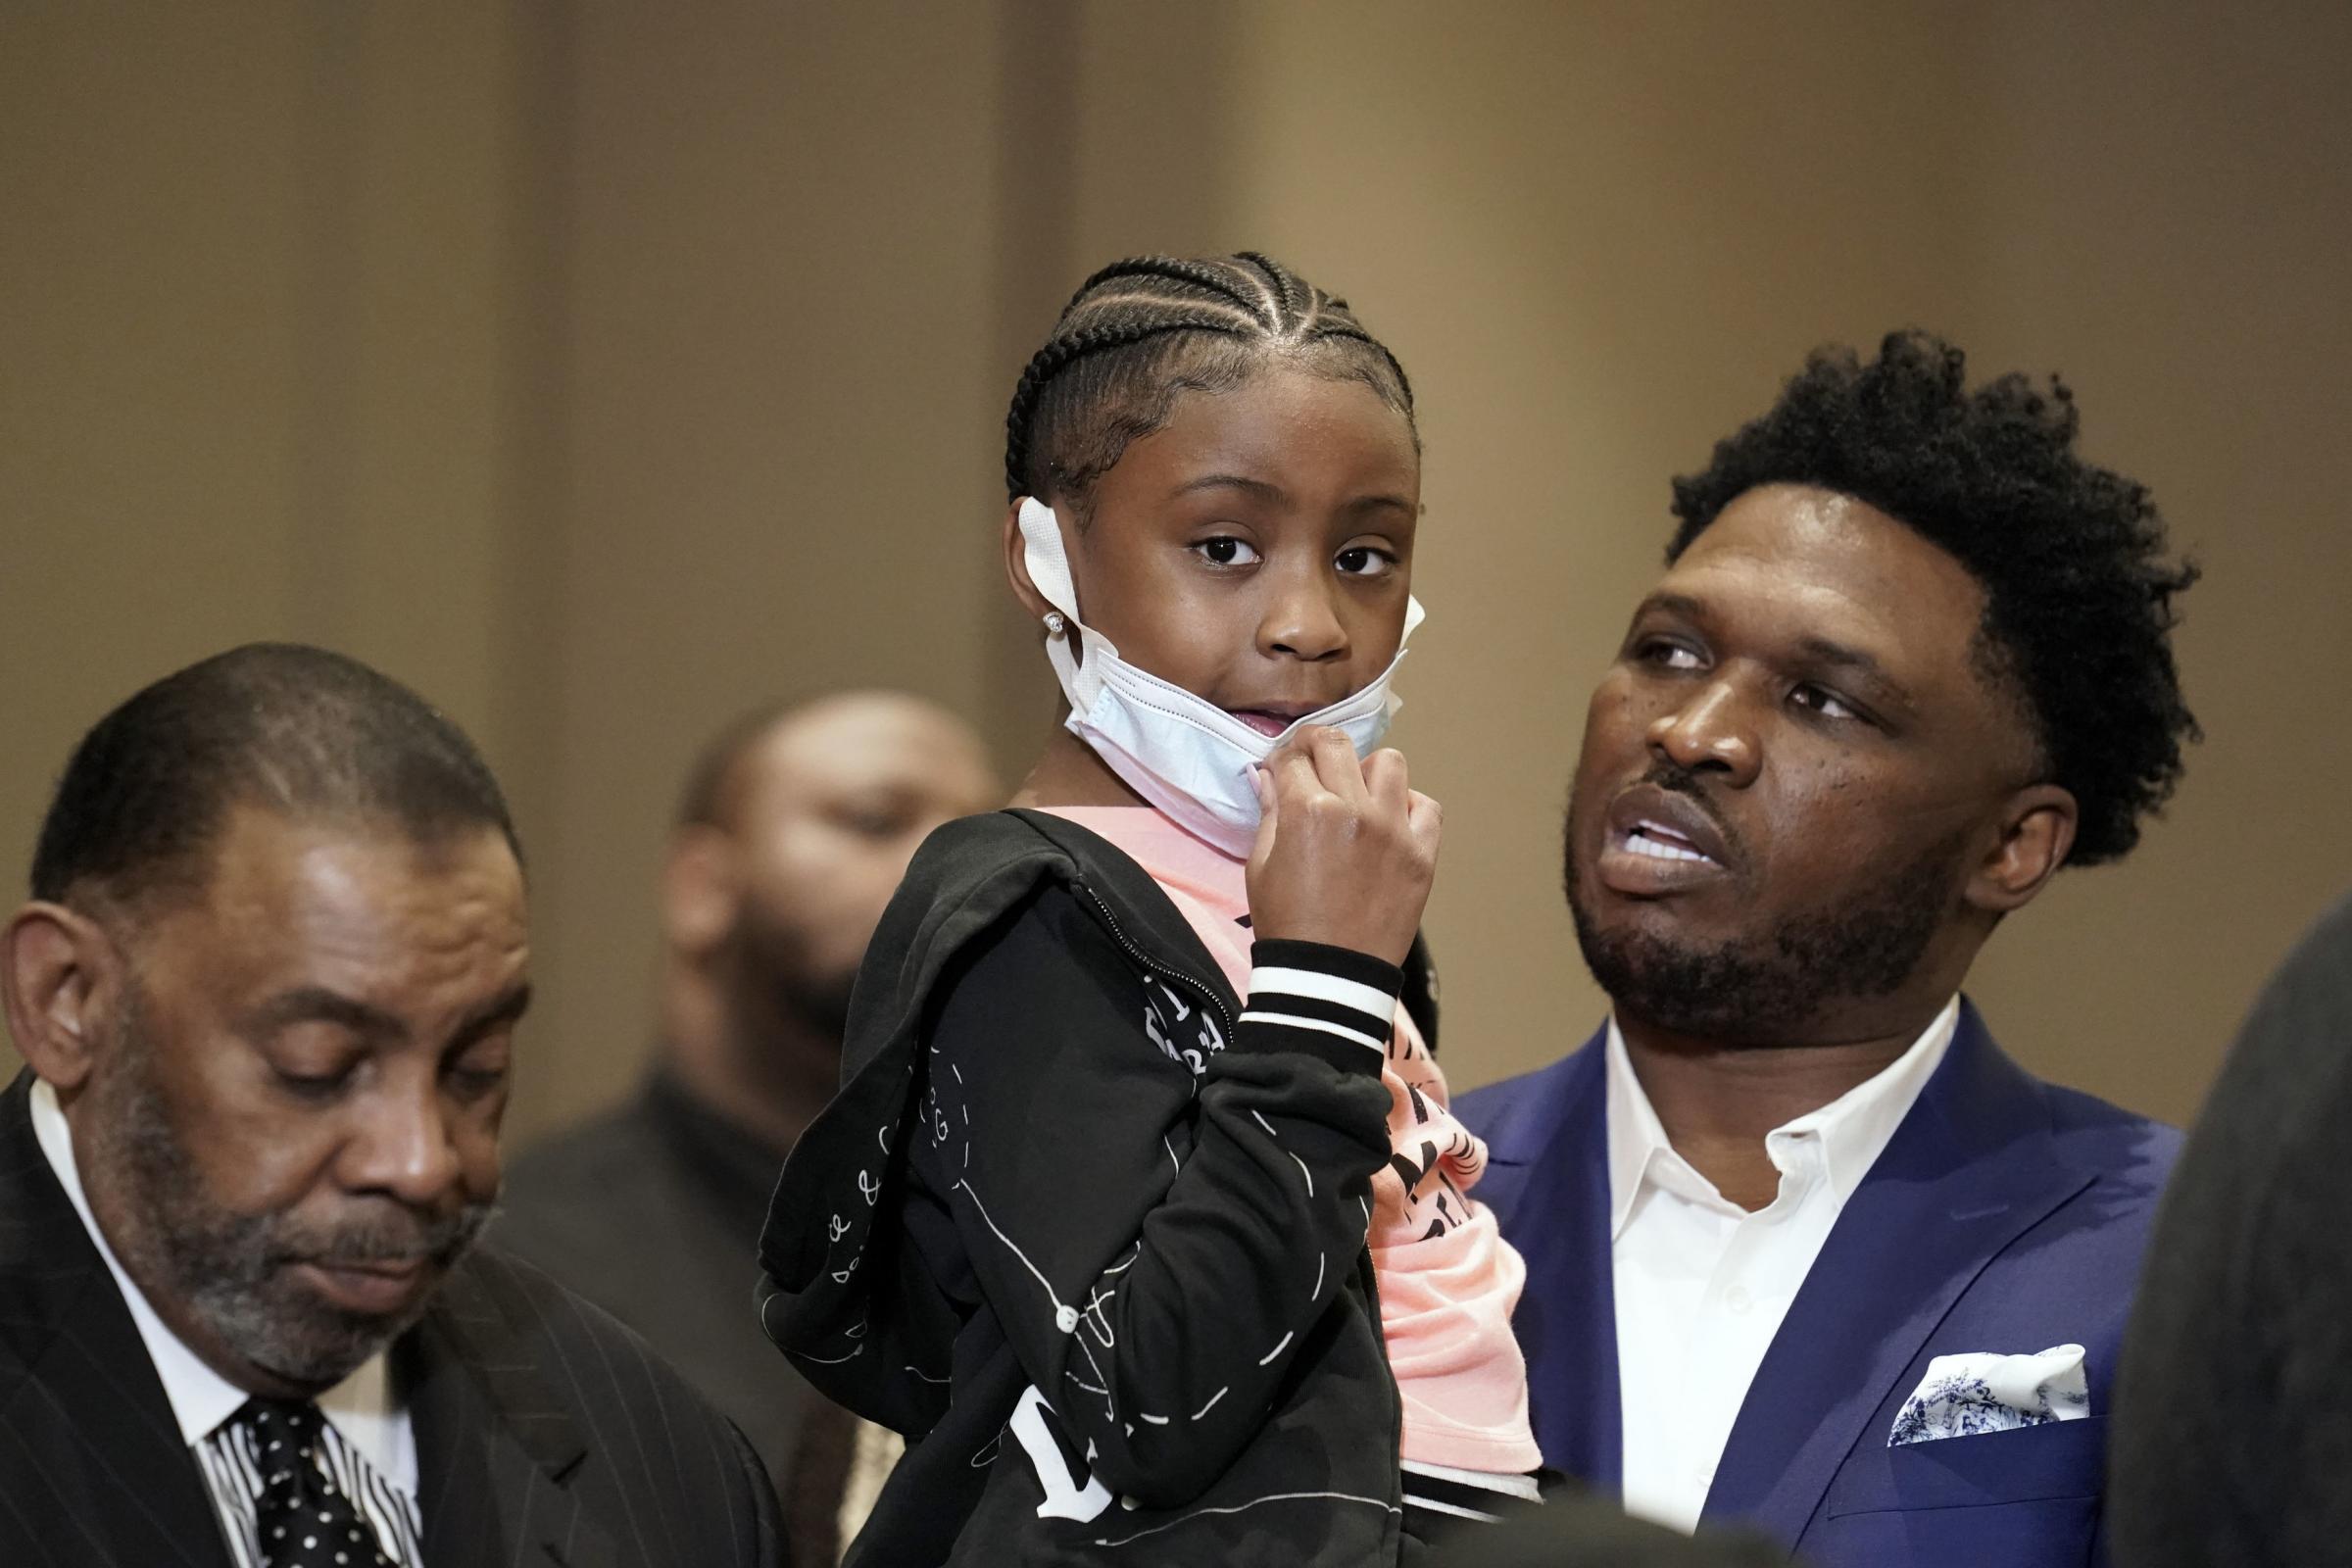 Gianna Floyd, the daughter of George Floyd, joins family and supporters during a news conference after the verdict was read in the trial of former Minneapolis Police Officer Derek Chauvin, Tuesday, April 20, 2021, in Minneapolis. (AP Photo/John